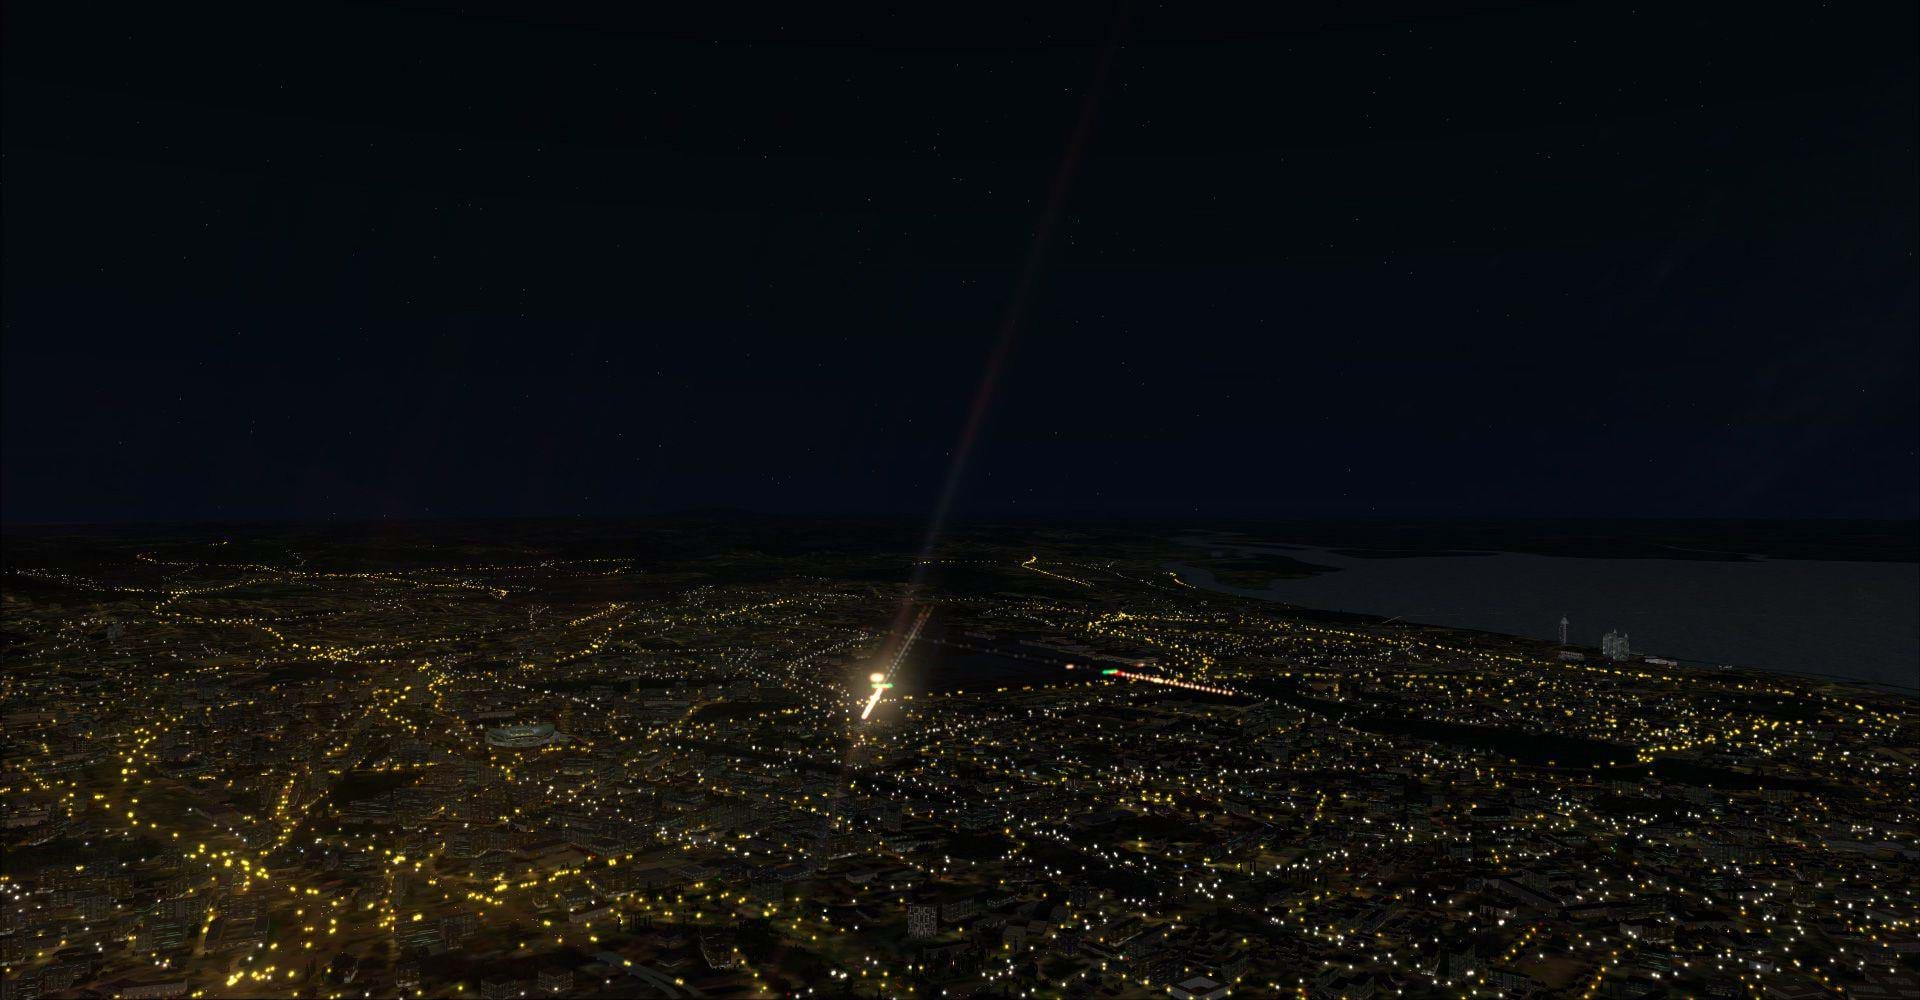 The ultimate FSX and P3D scenery: ORBX Global Vector and •